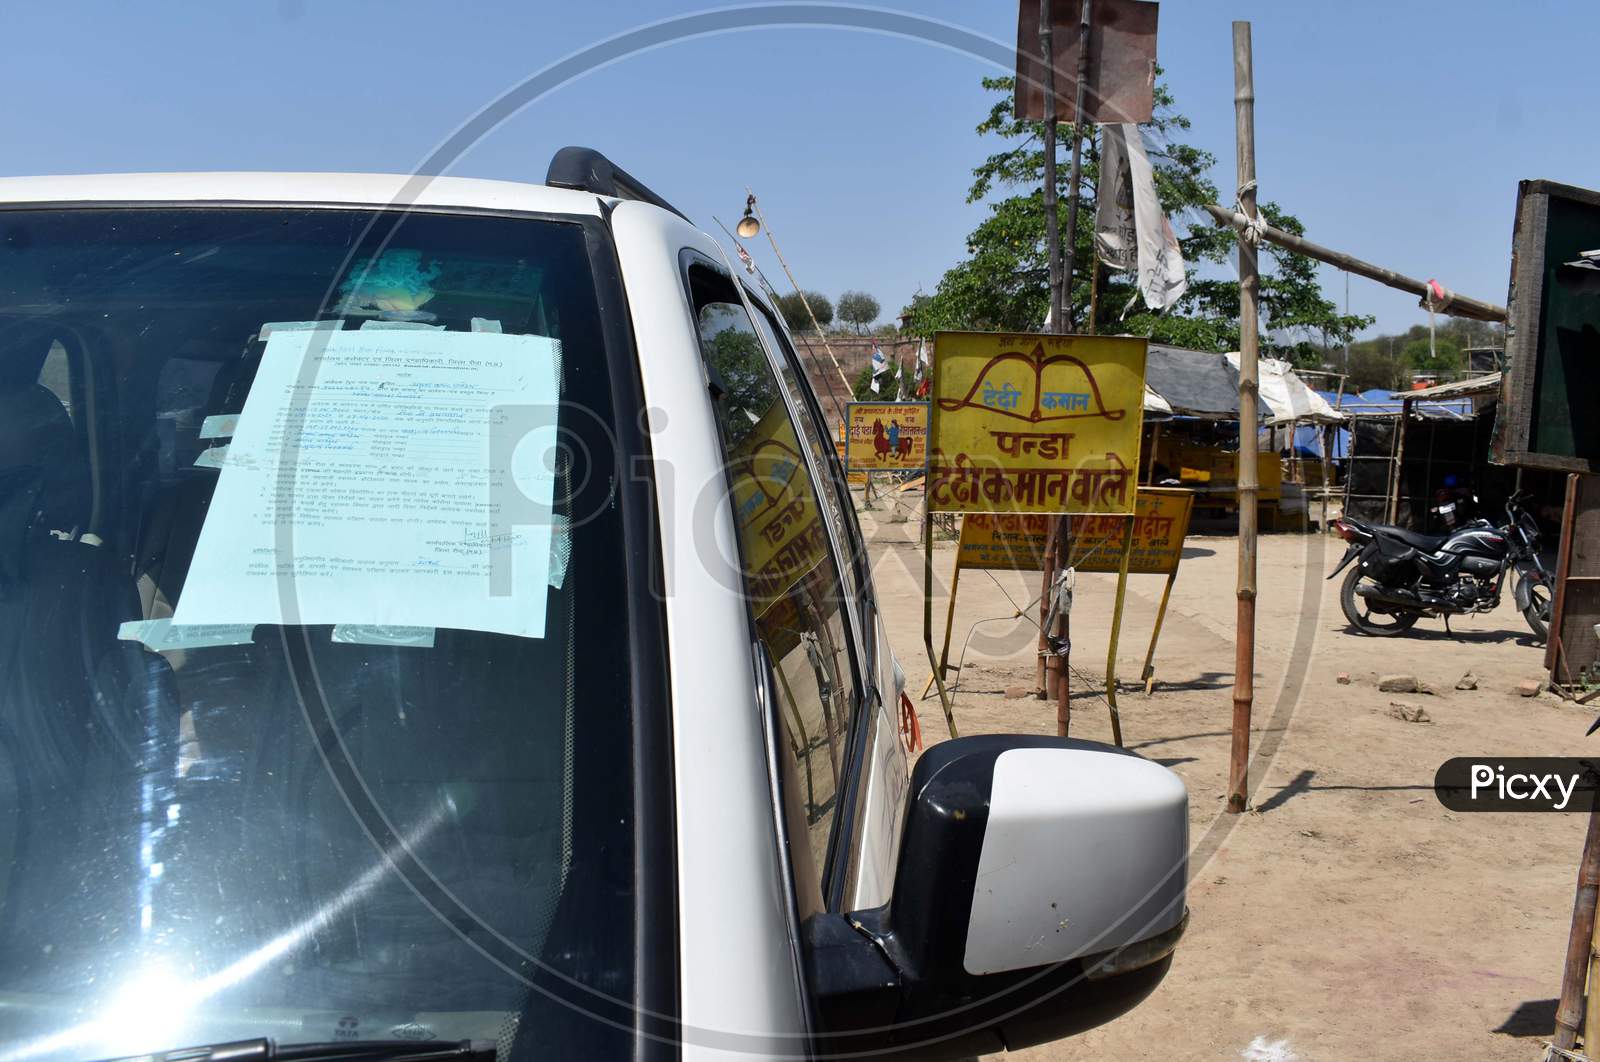 A Car With a Permission letter Tagged To glass Of a Car During COVID-19 0r Corona Virus Lockdown In India , Prayagraj